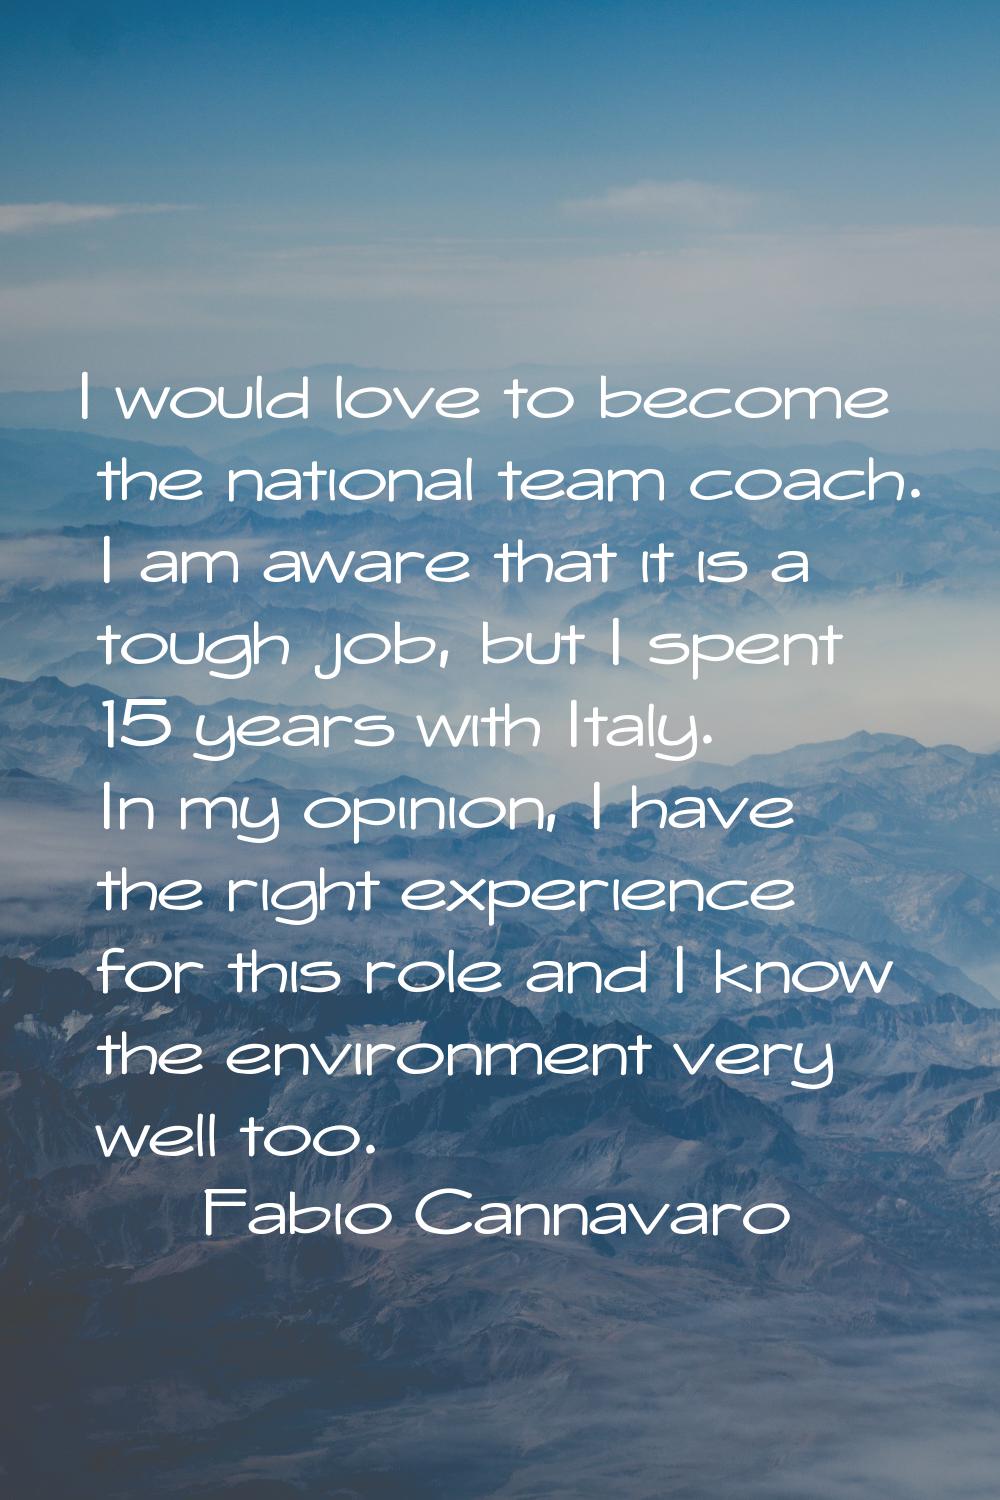 I would love to become the national team coach. I am aware that it is a tough job, but I spent 15 y